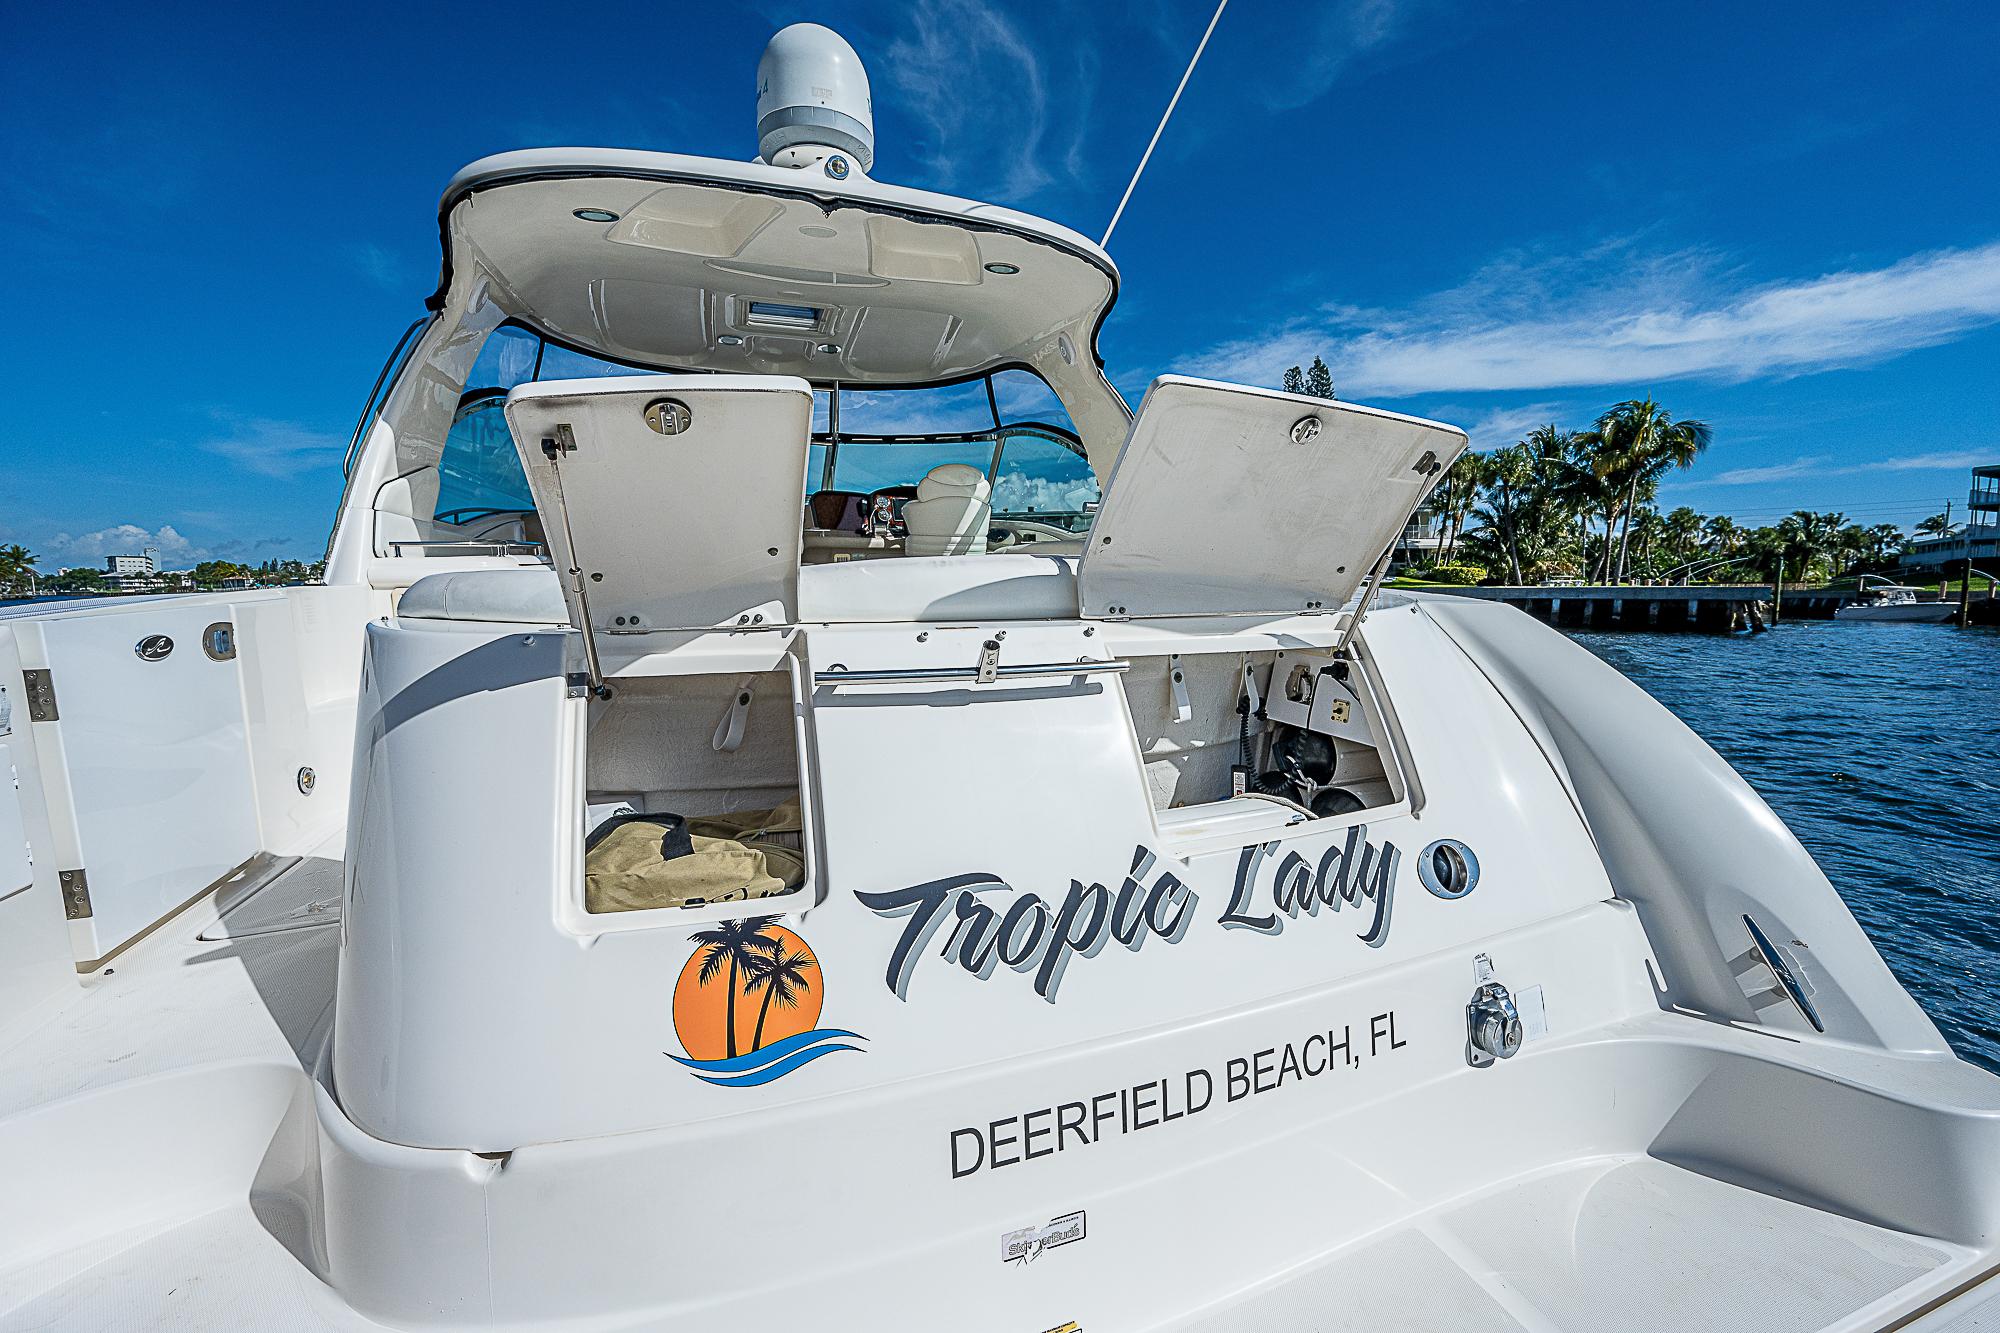 50 Sea Ray 2003 Tropic Lady Deerfield Beach, Florida Sold on 2023-02-08 by  Denison Yacht Sales